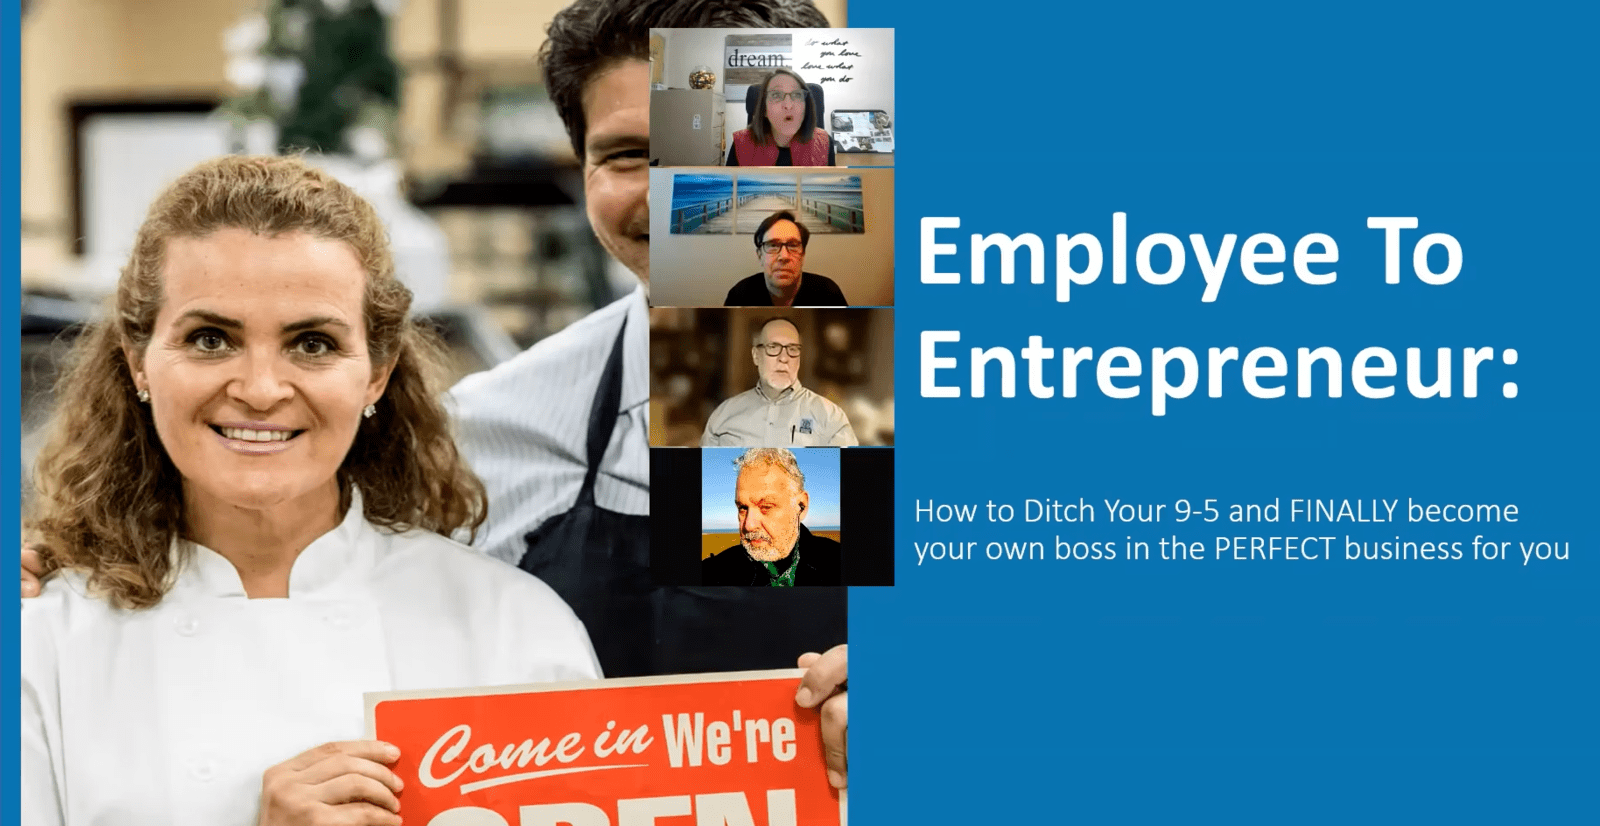 Employee To Entrepreneur: Ditch Your 9-5 and FINALLY Become Your Own Boss